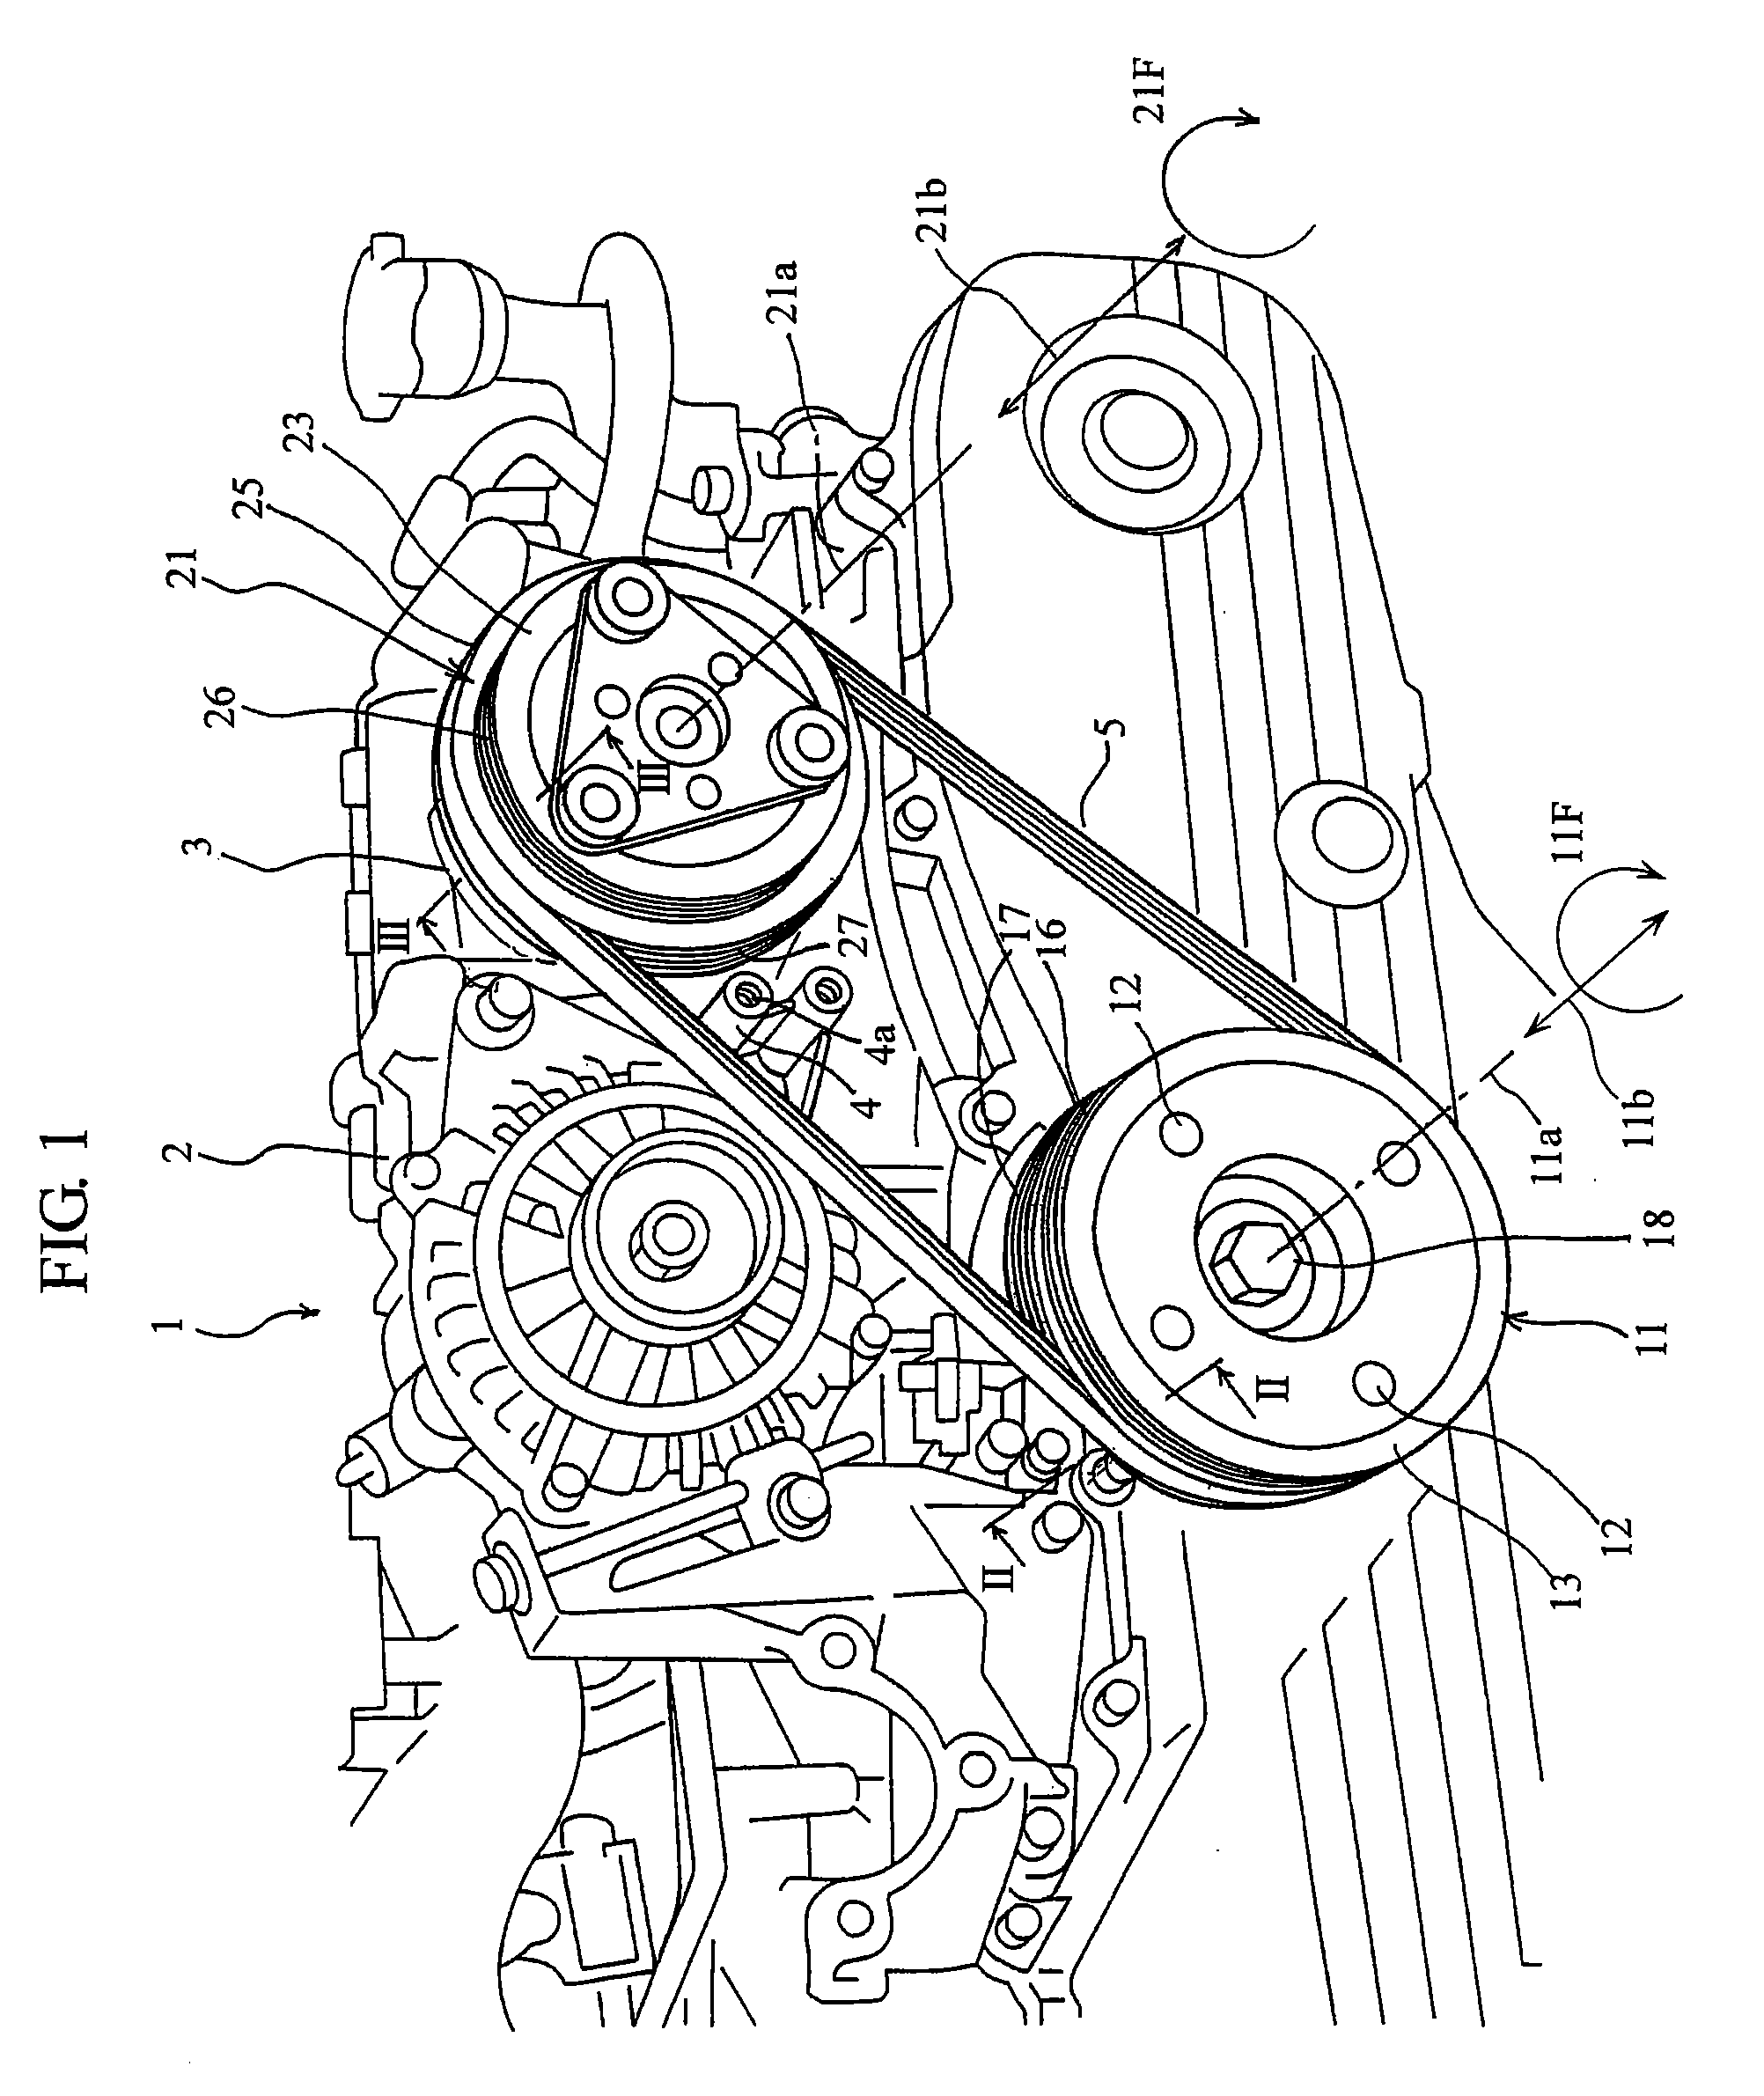 Method and apparatus for mounting and dismounting belts to and from pulleys